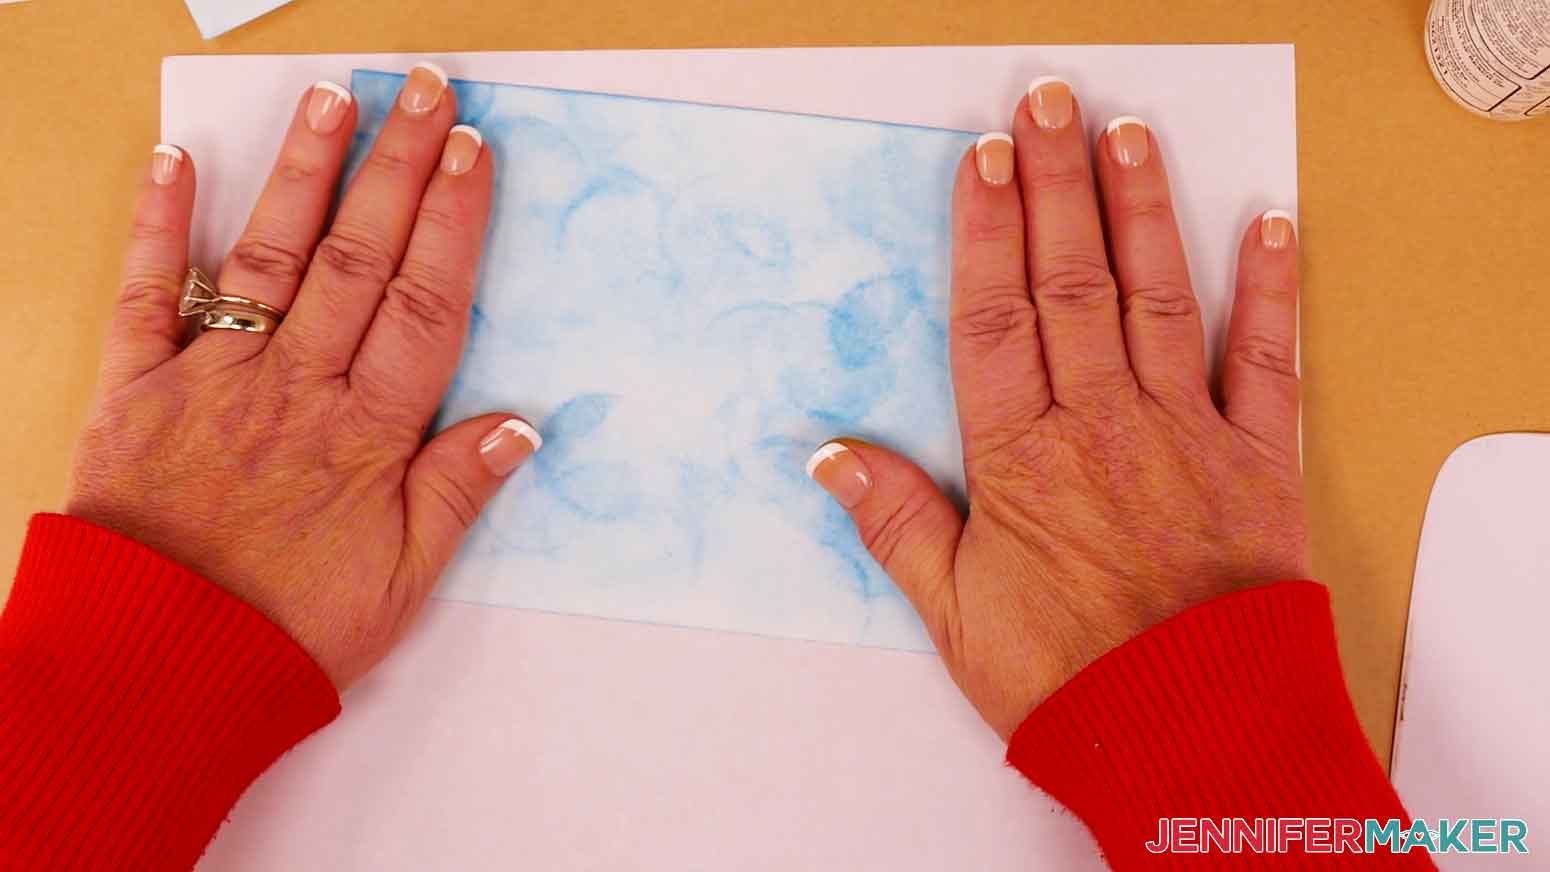 Apply craft glue to the back of the sky layer and attach it to the front of the folded blank card.